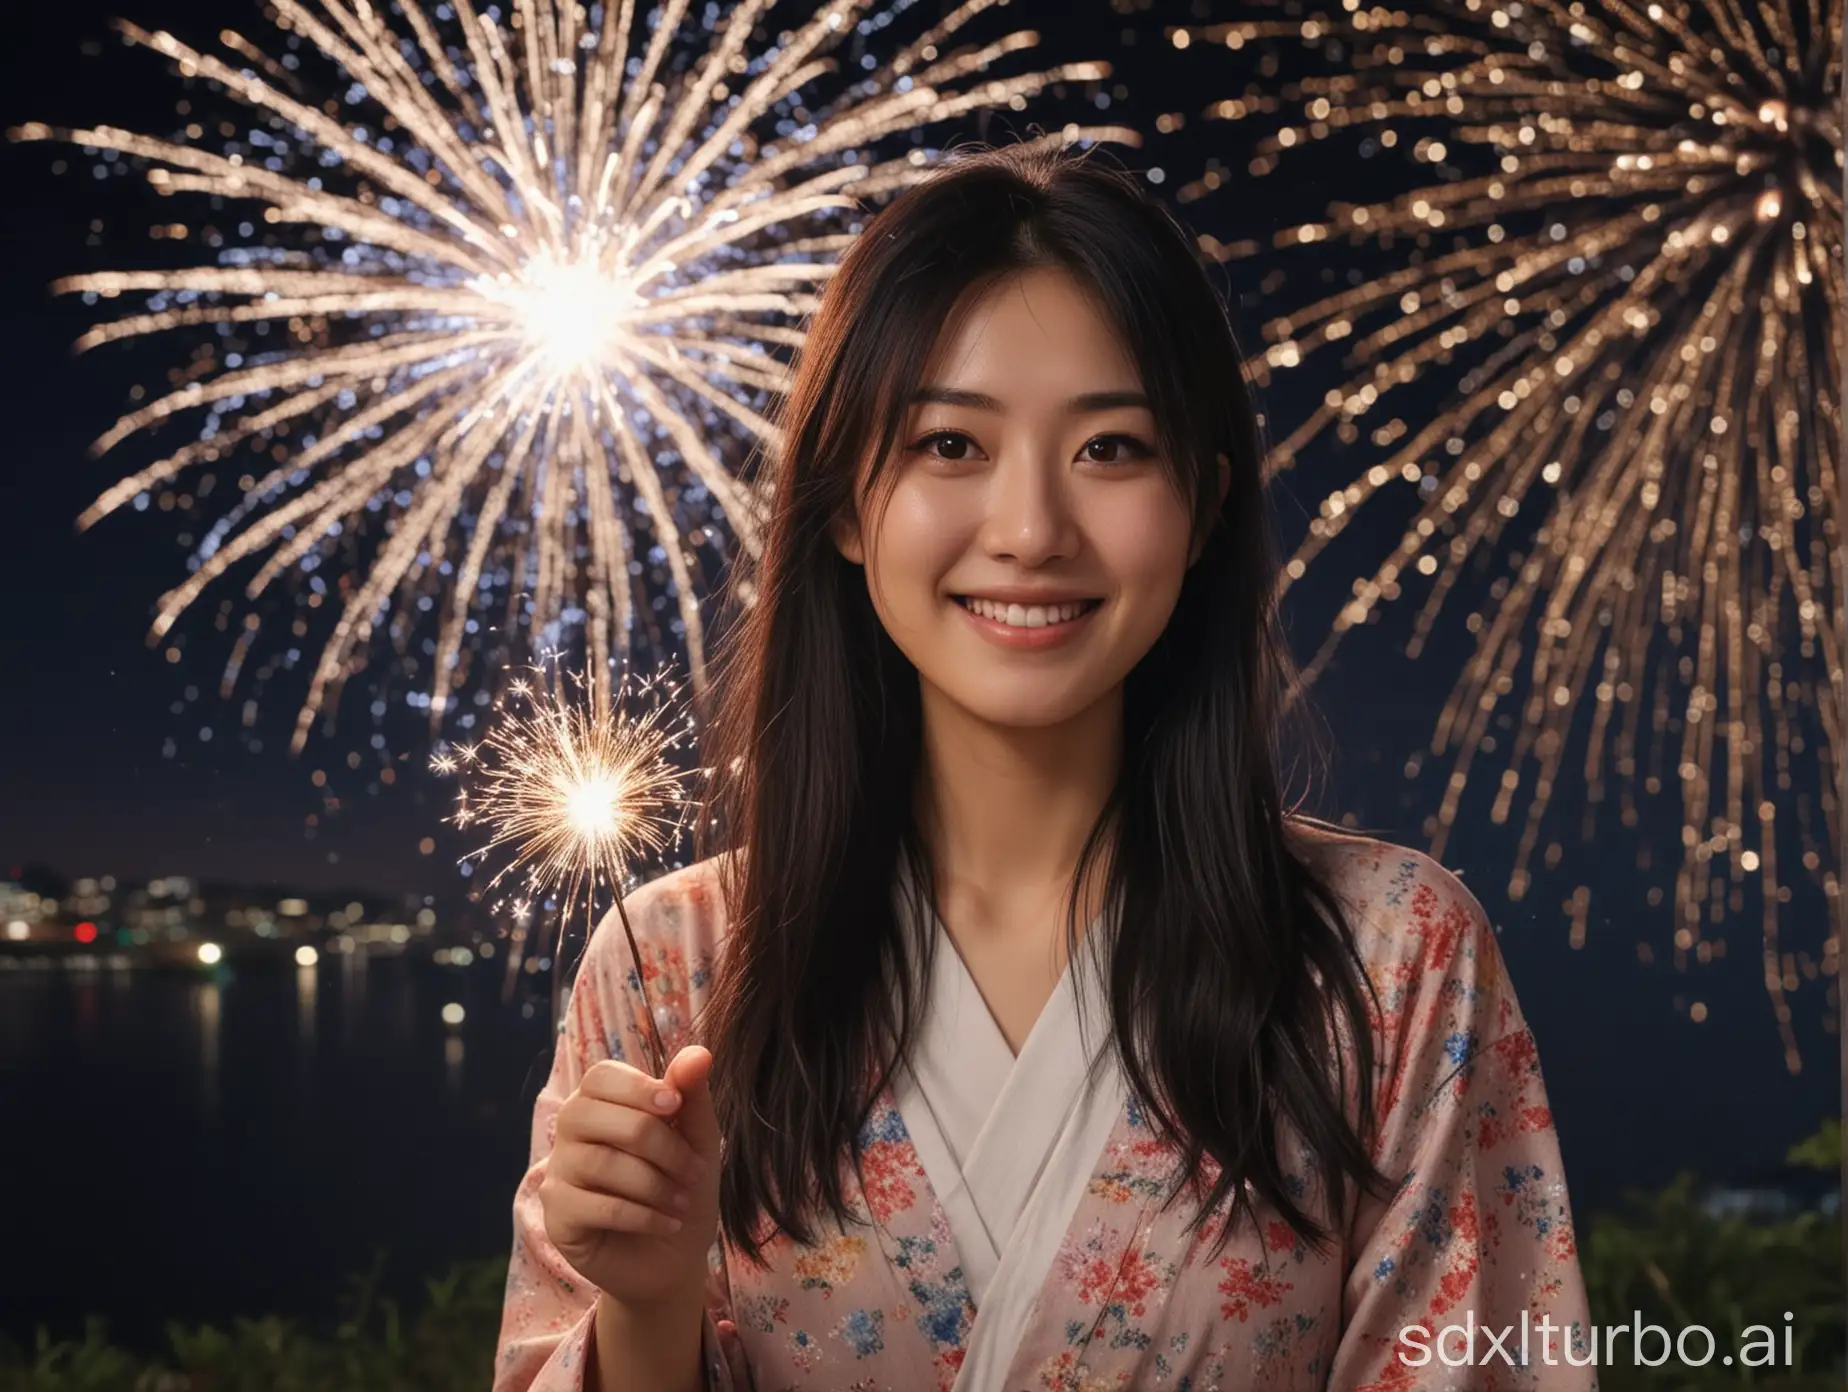 beautiful intellectual typical Japanese 33-year-old girl stands at night with firework blooming, smiling but with some tears, Instagram model, long black hair, warm, black eyes, height 6.5 feets, female, masterpiece, 4k, correct fingers or hands4K, realistic, masterpiece